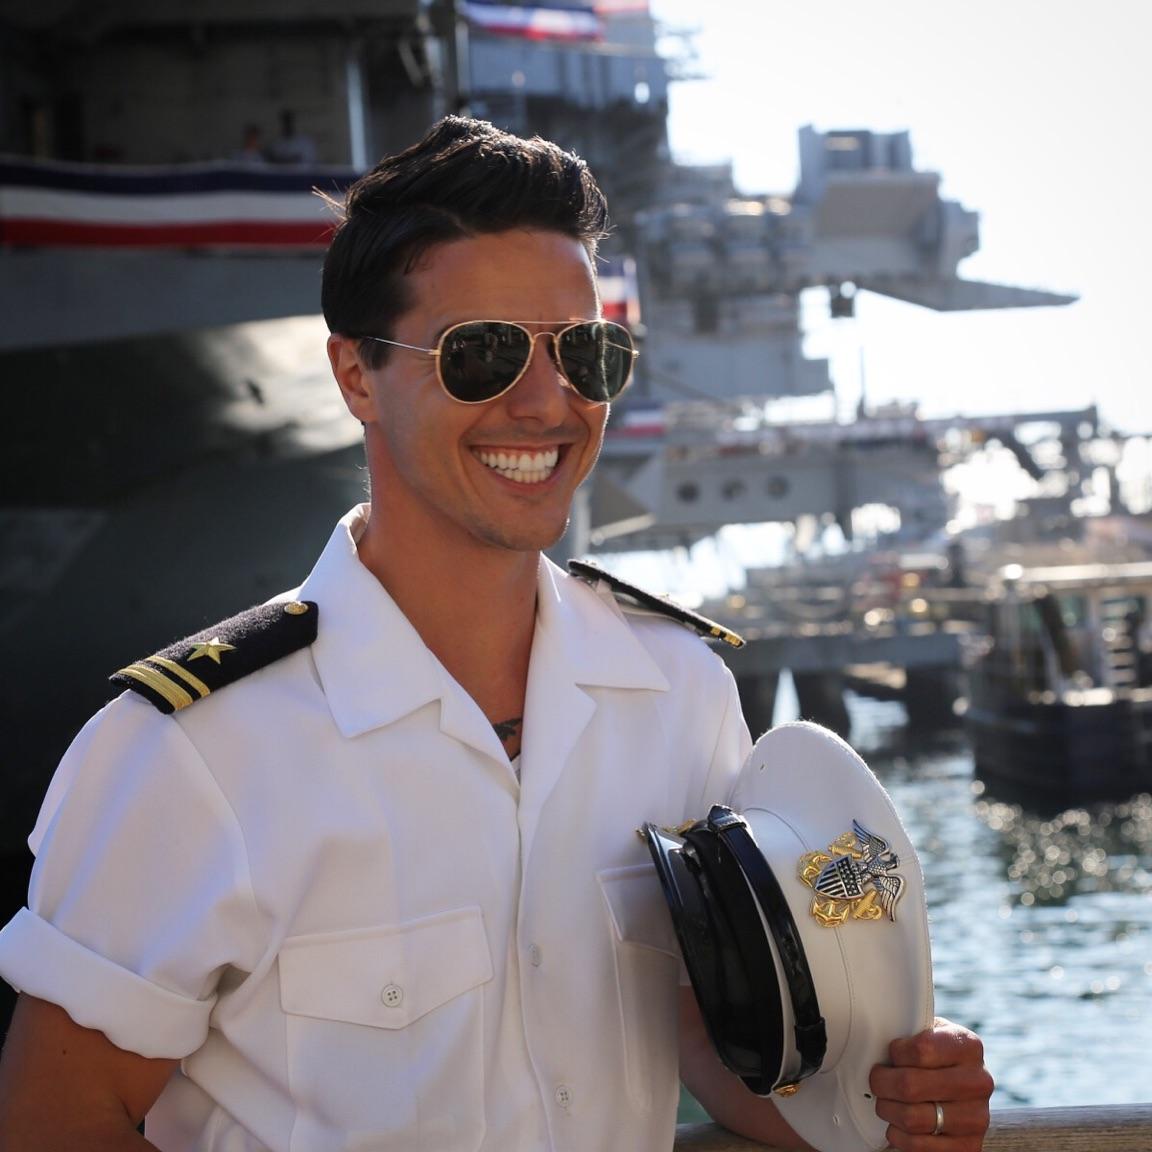 Cruise, Tom - S in uniform with smile